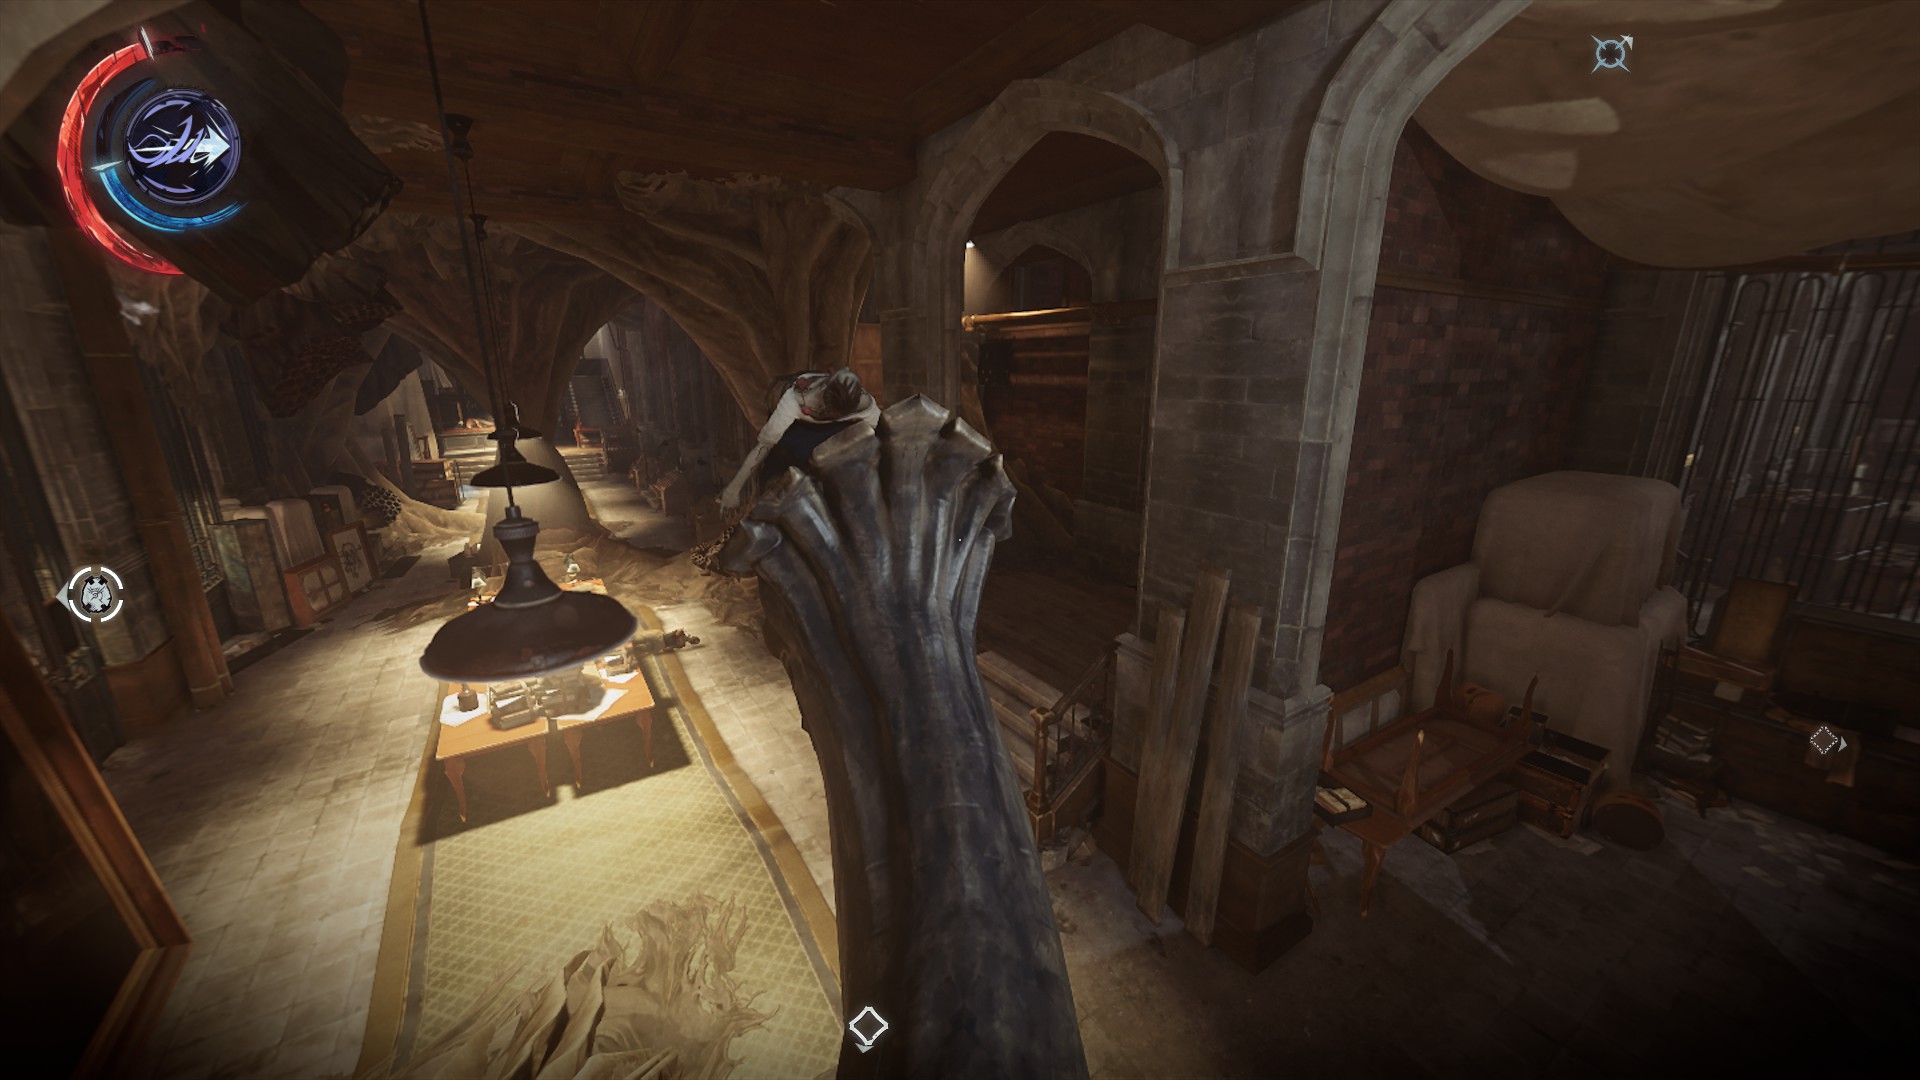 Unconscious Dishonored 2 Enemies Who Look Like They Just Had A Sick Party